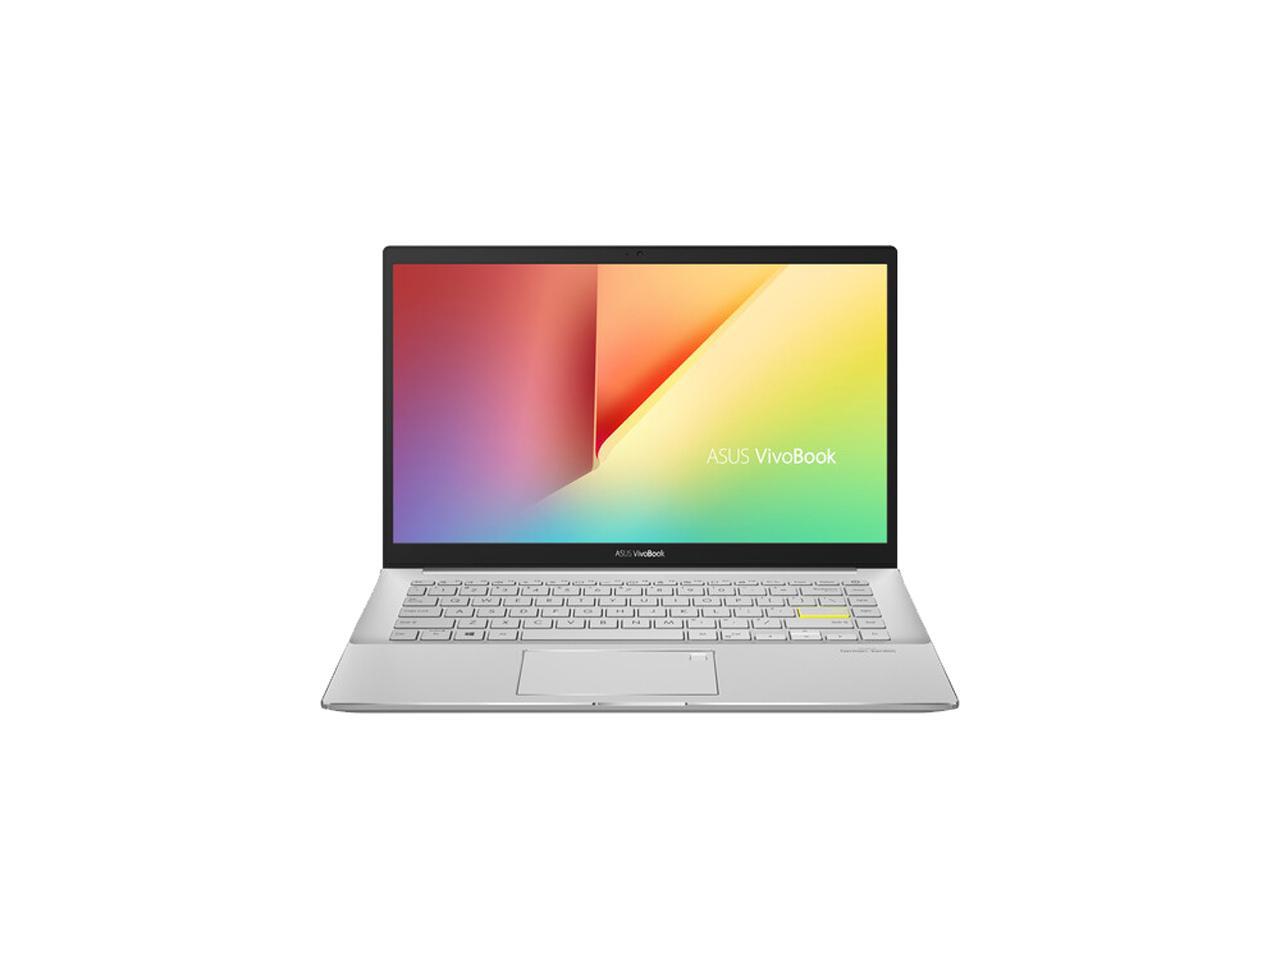 ASUS VivoBook S14 S433 Thin and Light Laptop, 14" FHD Display, Intel Core i5-1135G7 CPU, 8 GB DDR4 RAM, 512 GB PCIe SSD, Thunderbolt 3, Wi-Fi 6, Windows 10 Home, Dreamy White, S433EA-DH51-WH